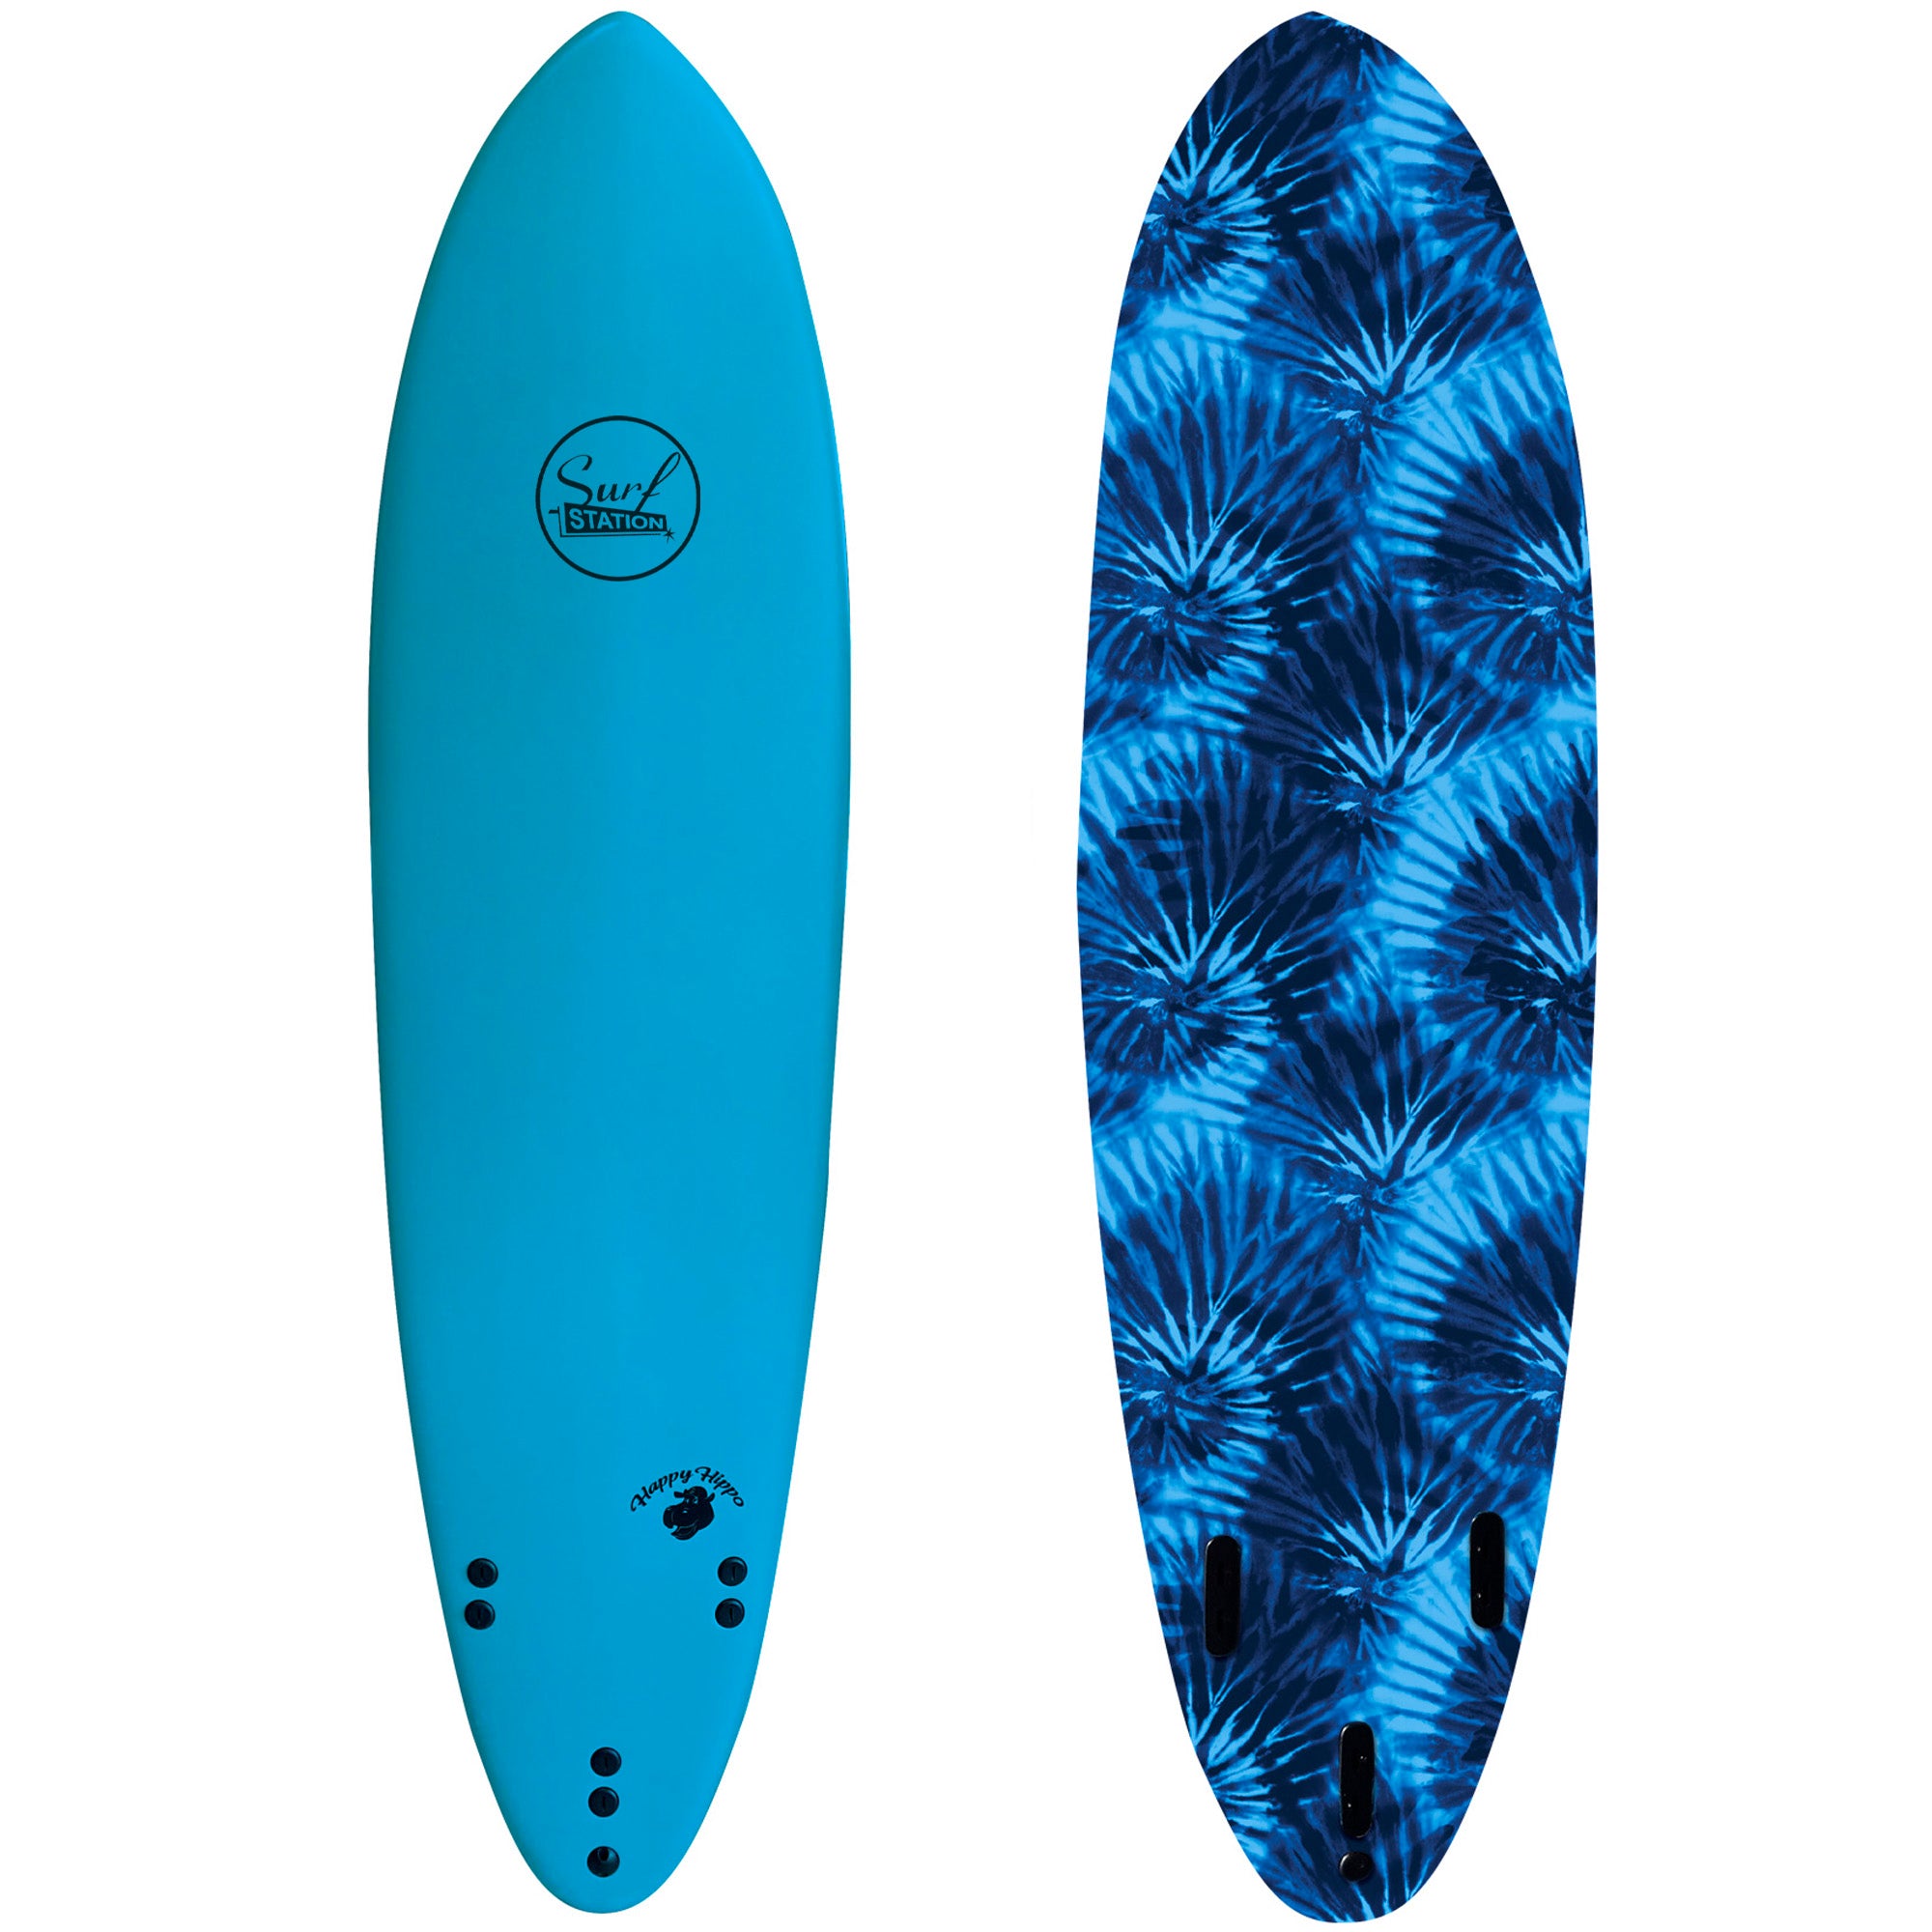 Surf Station Happy Hippo 7'0 Soft Surfboard